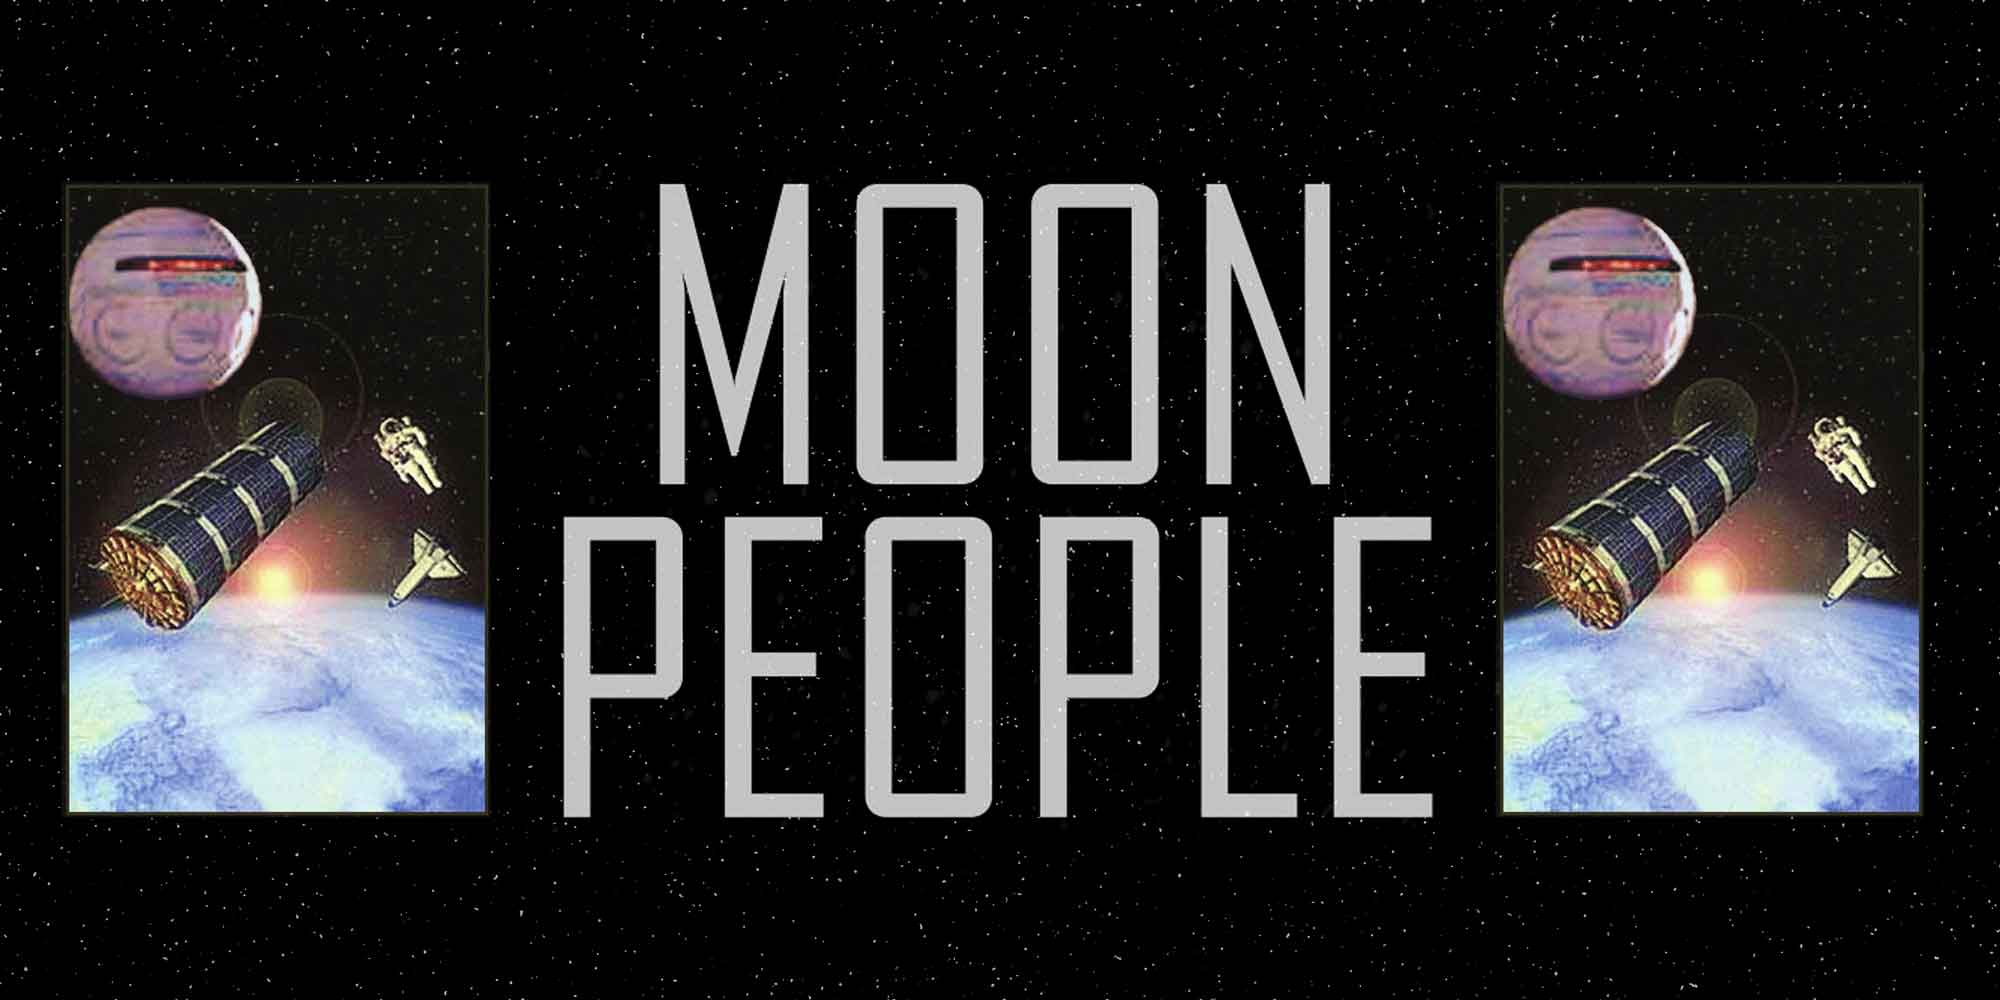 Moon People: The Best Worst Book Ever Self-Published